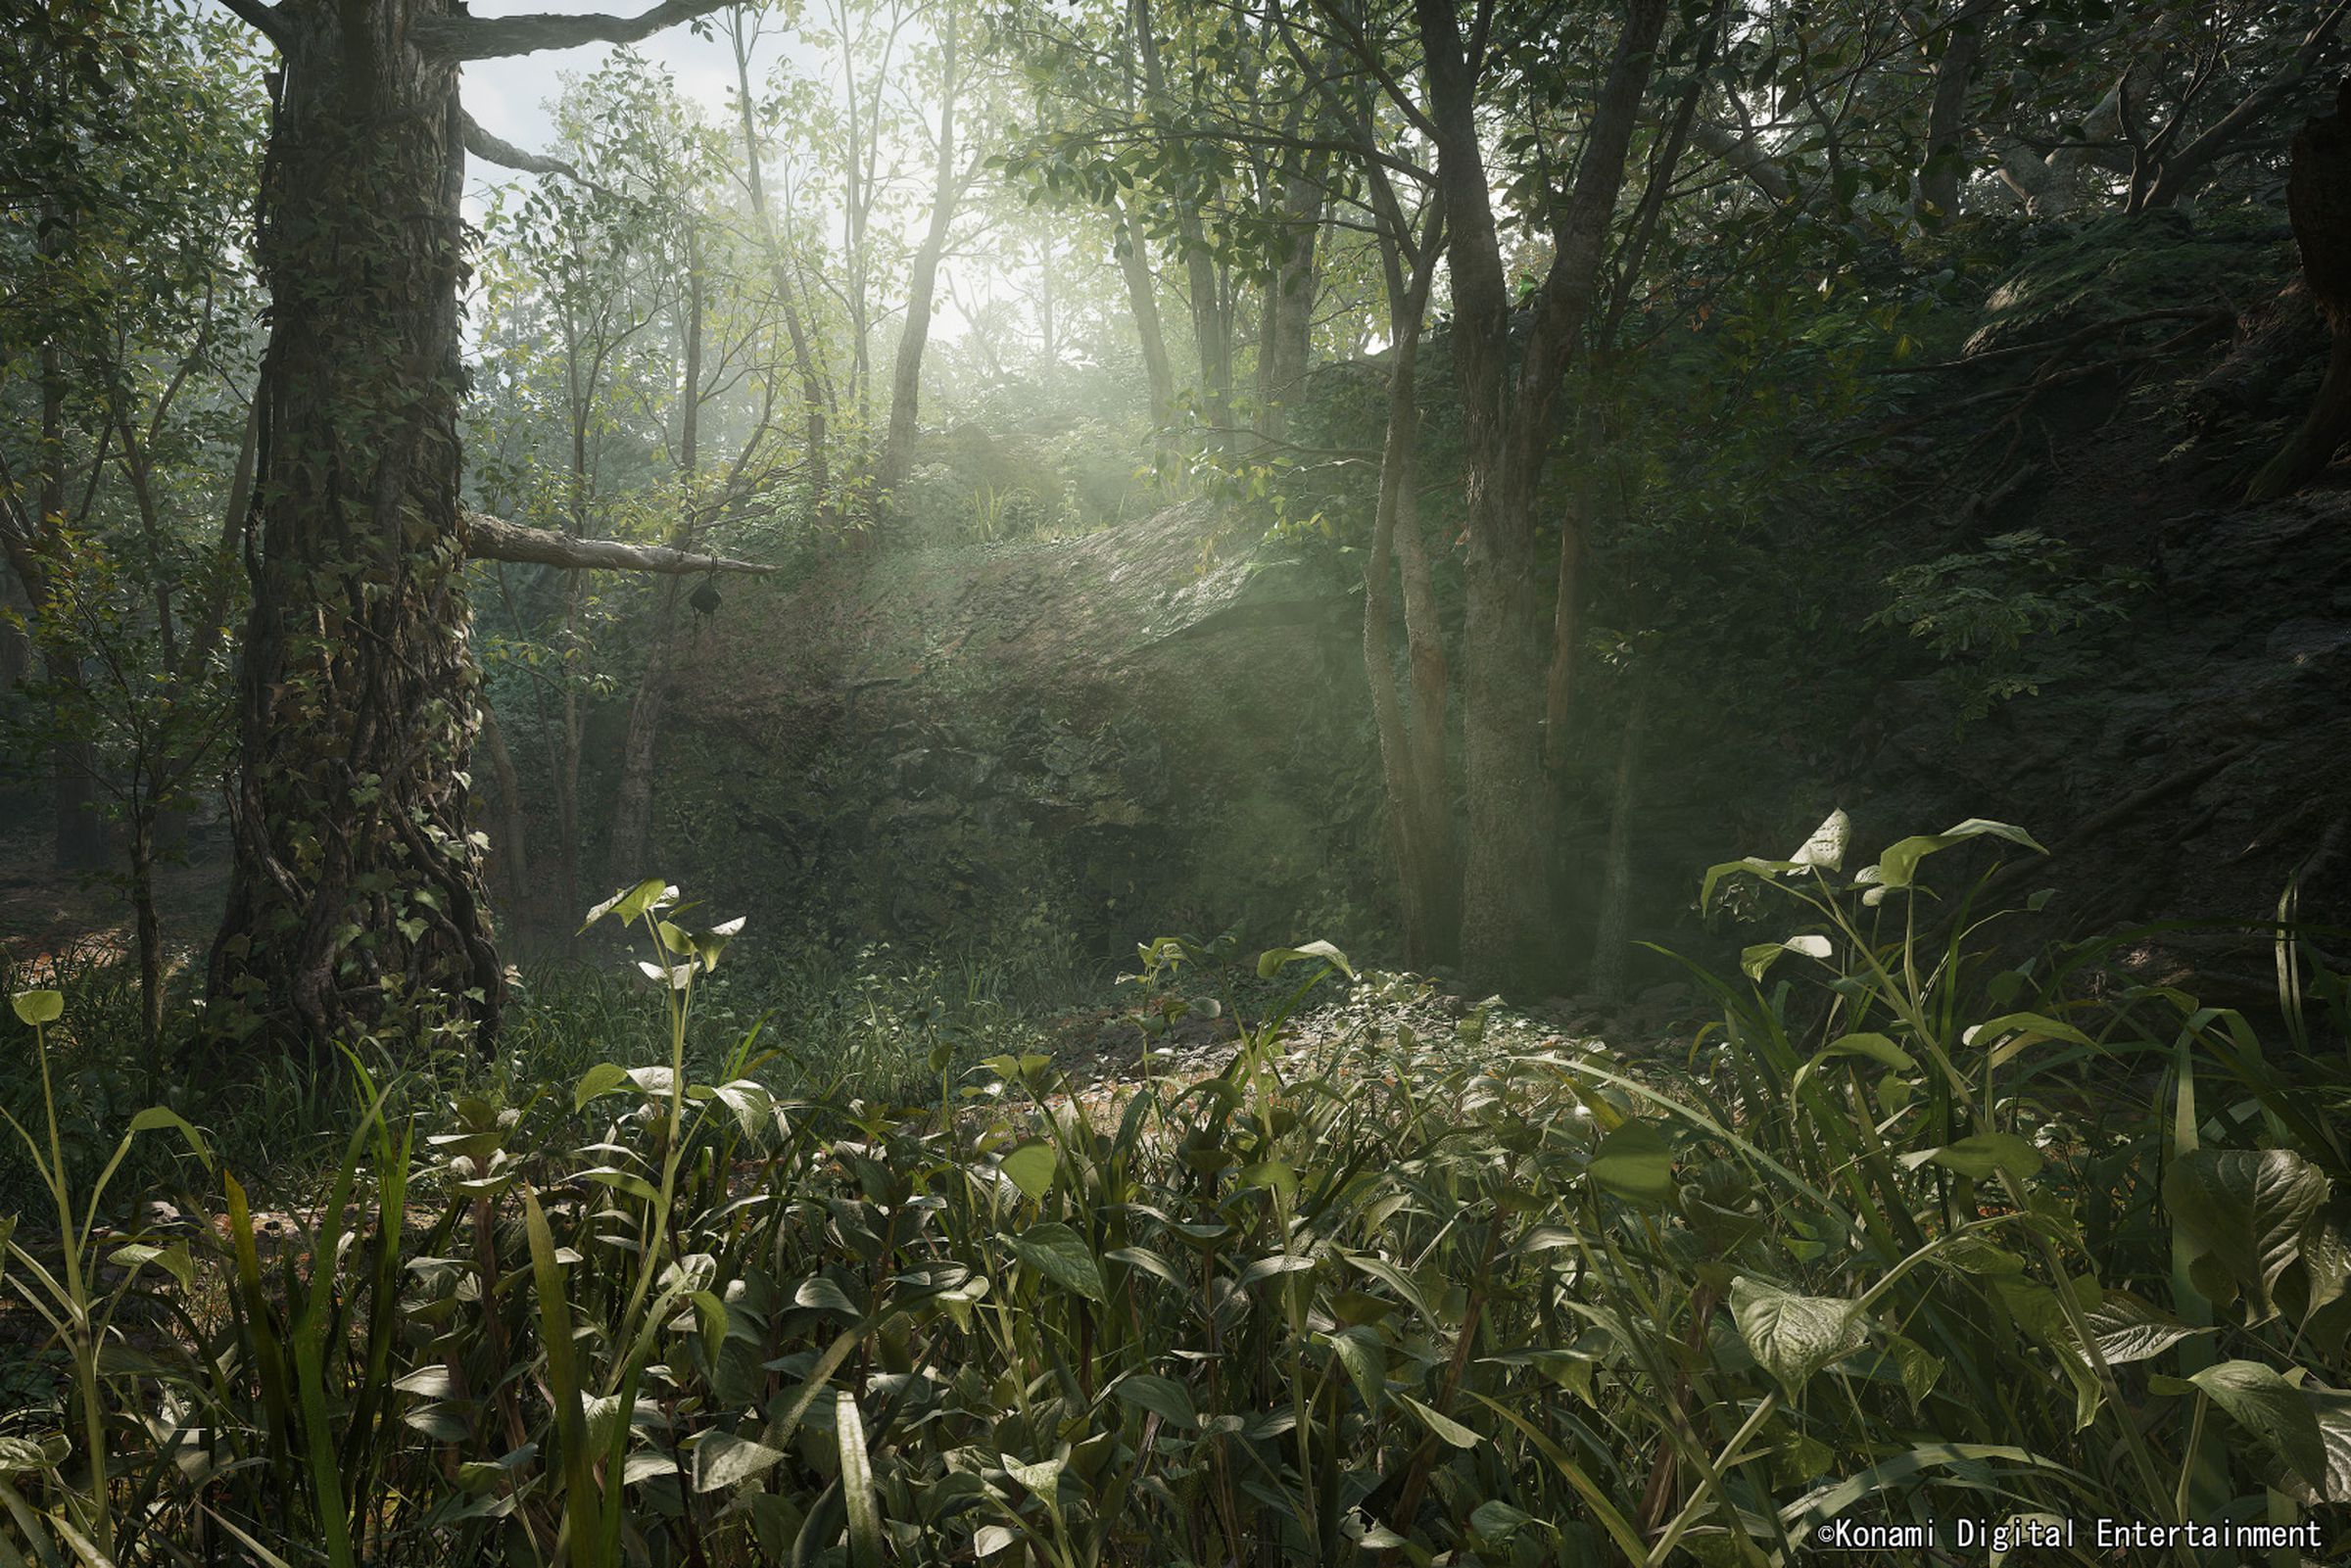 A screenshot from Konami’s MGS3 remake showing a lush forest.